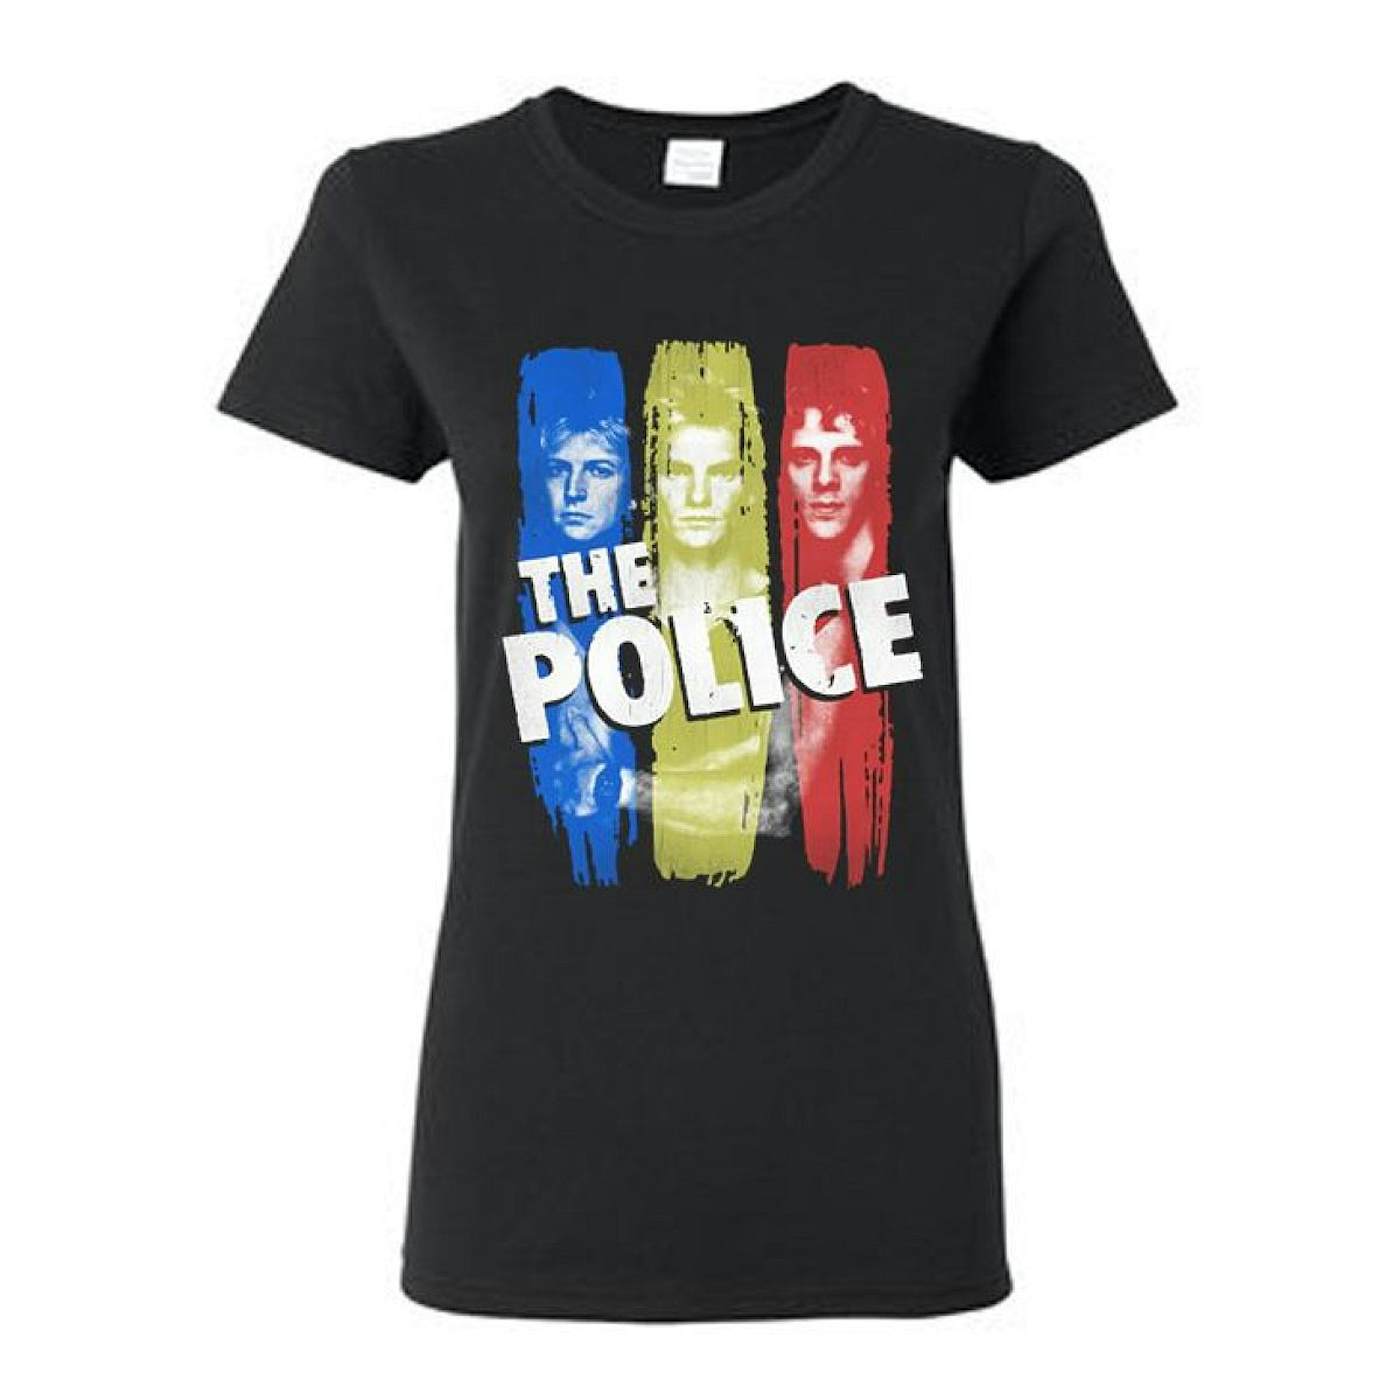 The Police Women's Vertical Stripes T-Shirt